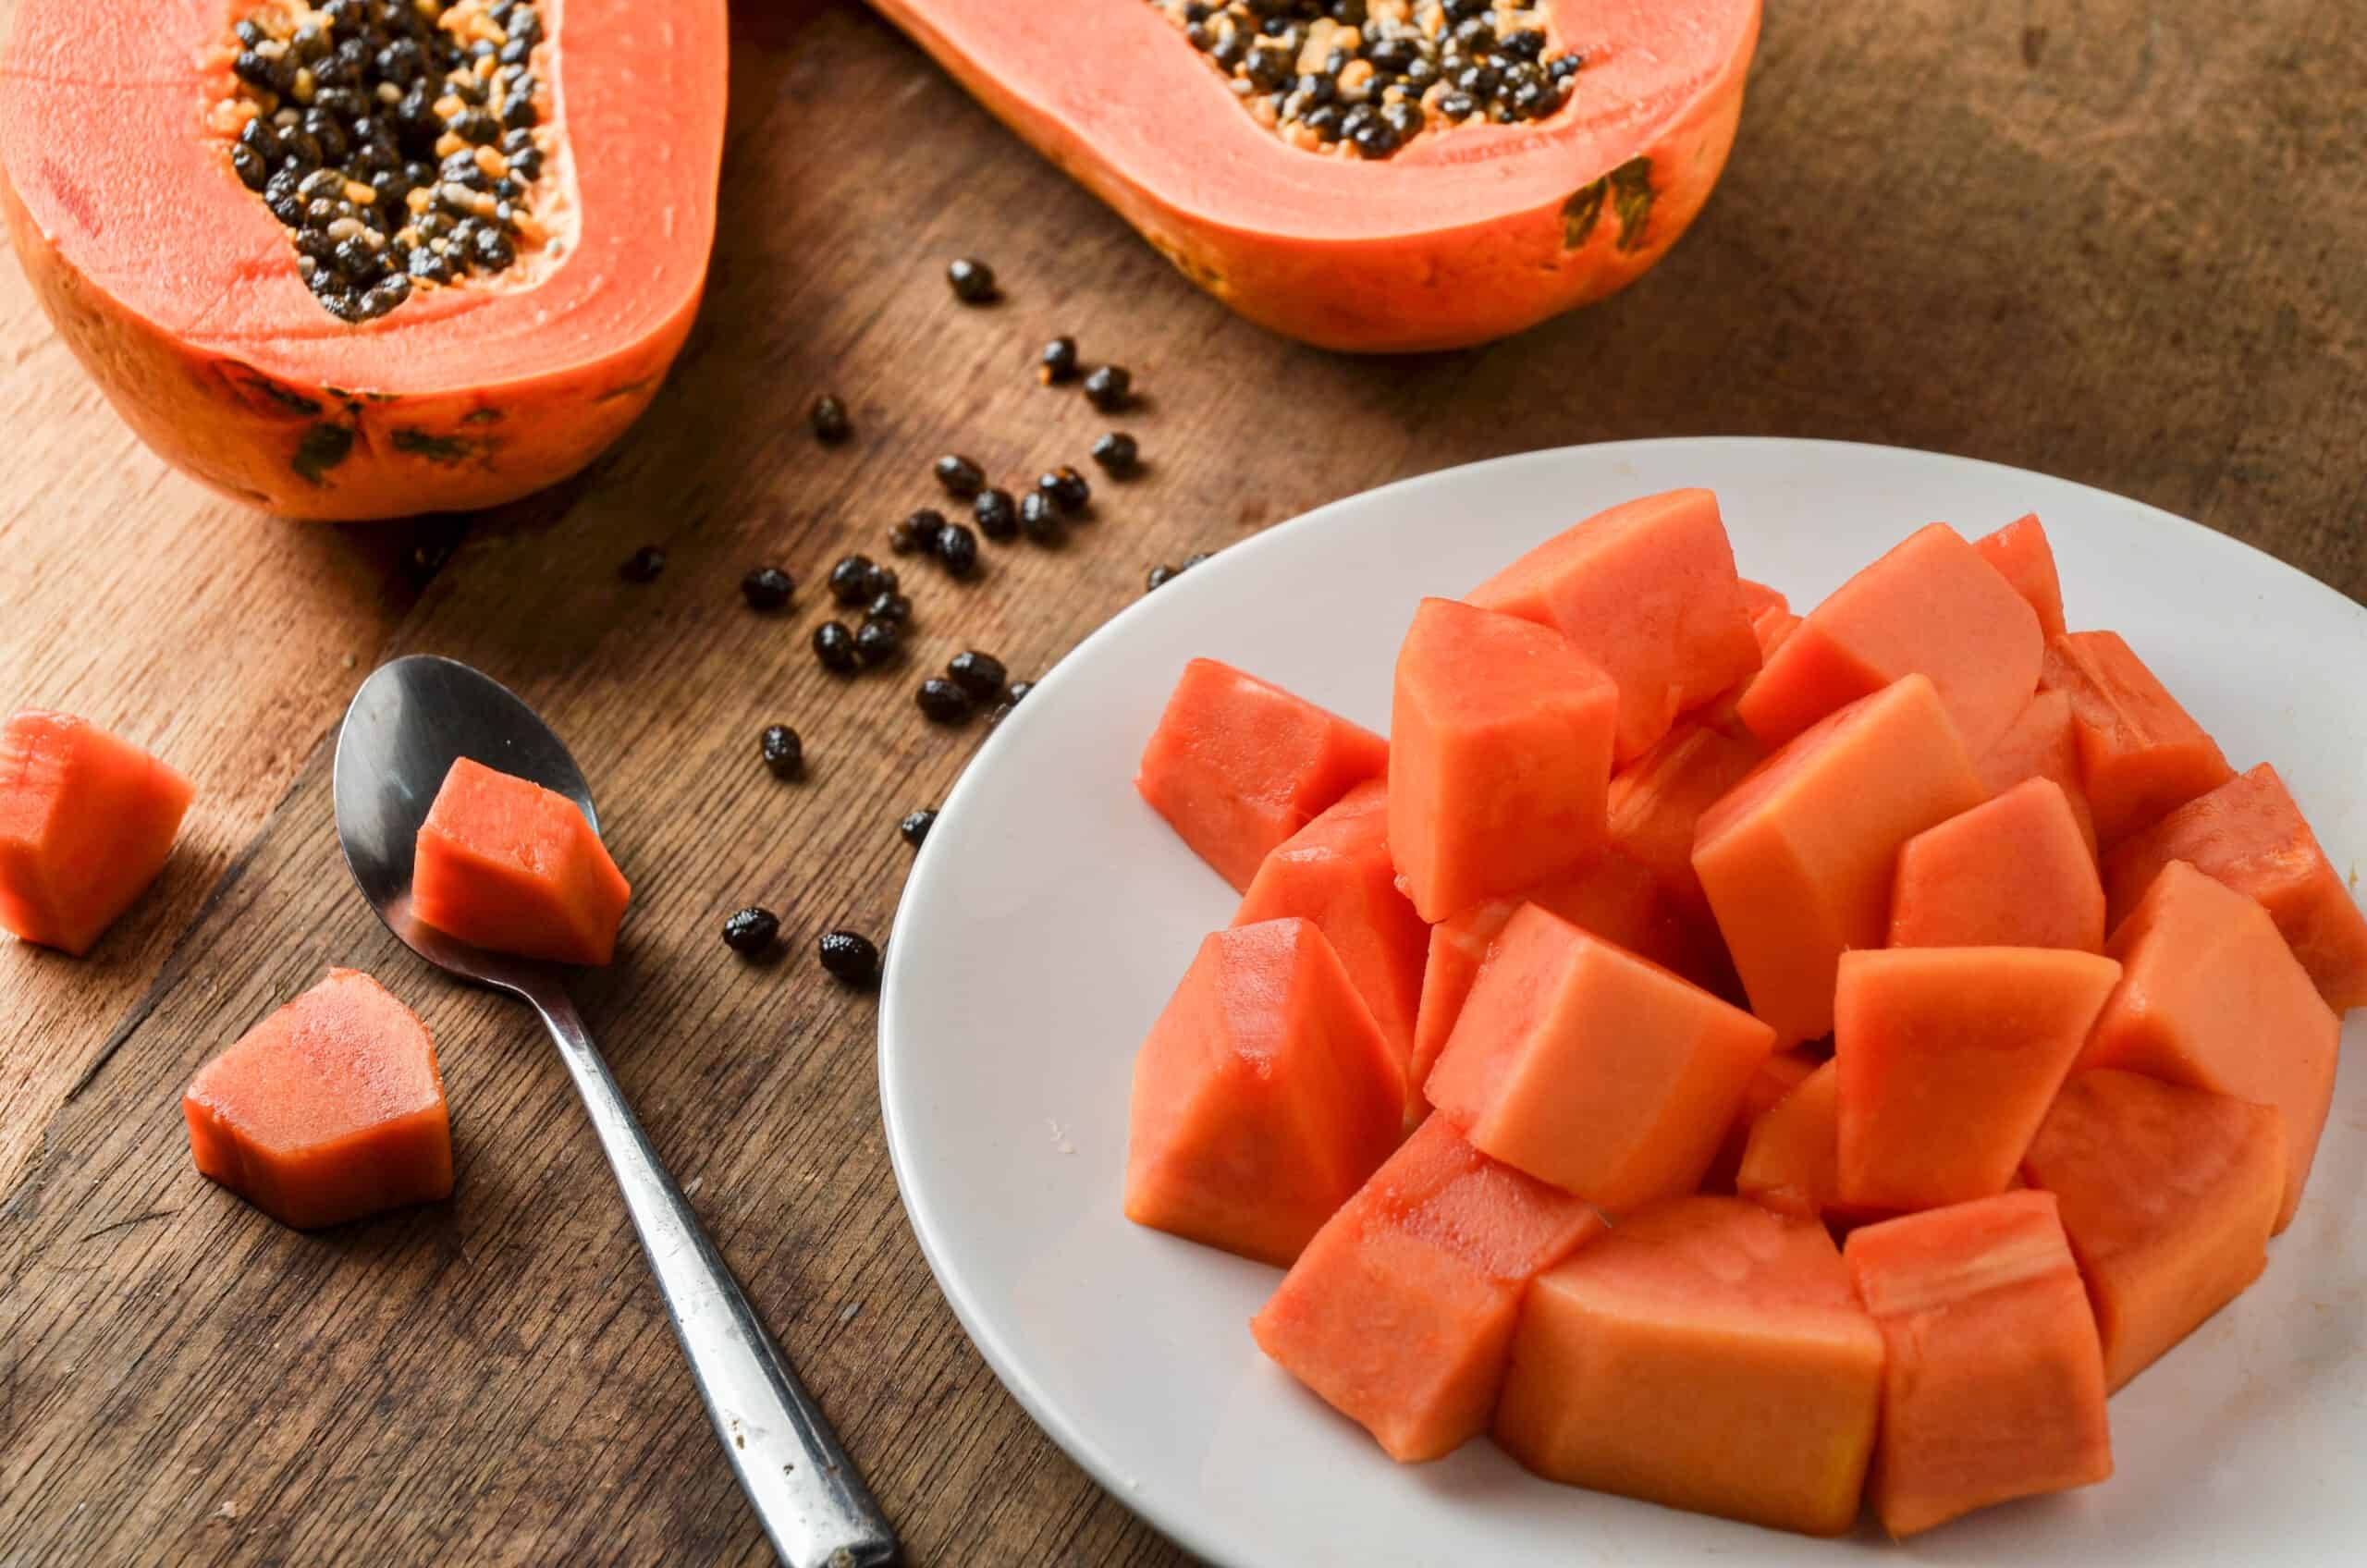 Papaya: Contains an enzyme called papain, Used to tenderize meat. 2560x1700 HD Wallpaper.